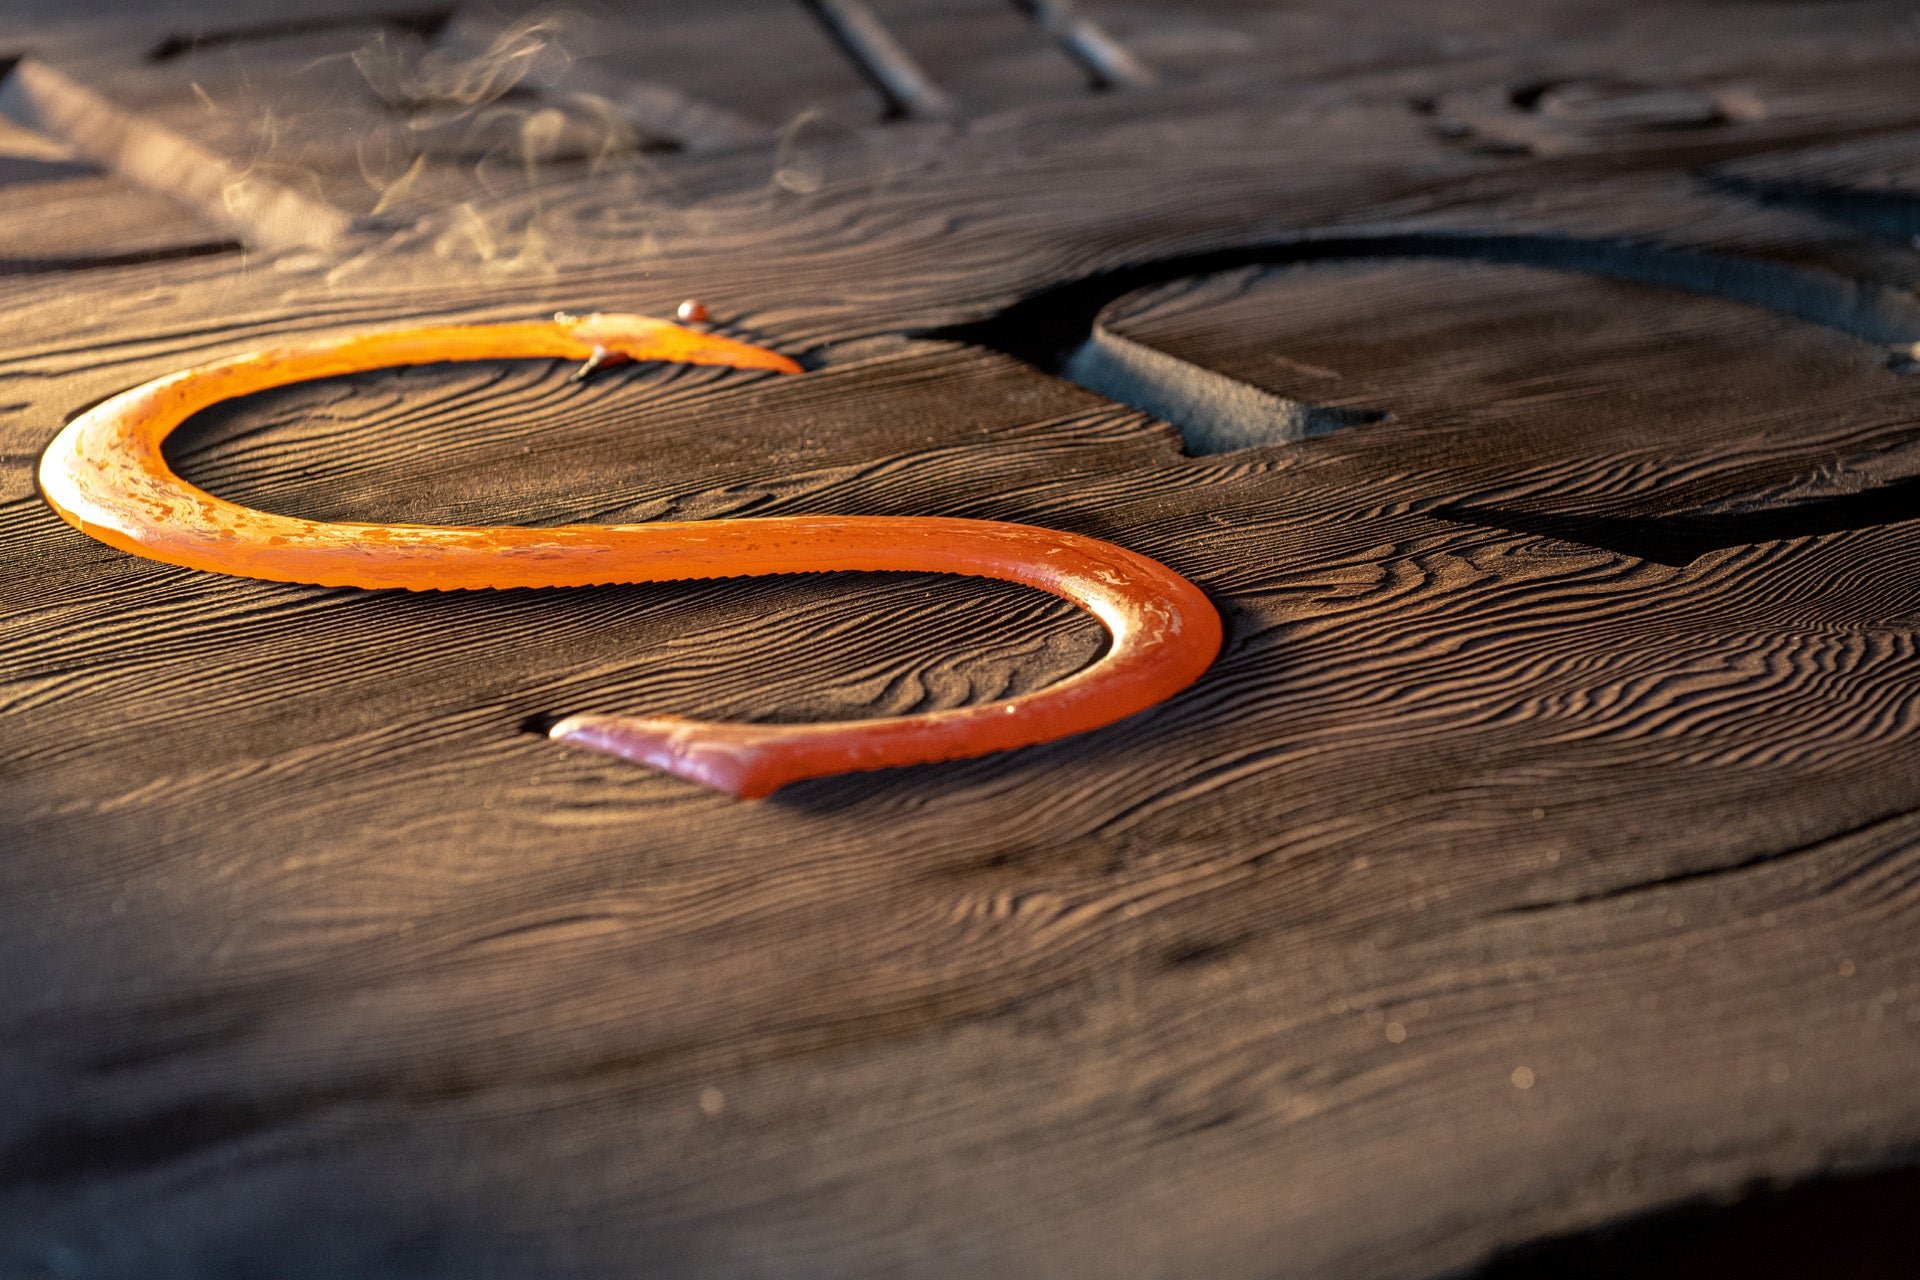 RINGS OF POWER_Molten S on Wood_CONCEPTREALIZATIONS.jpg